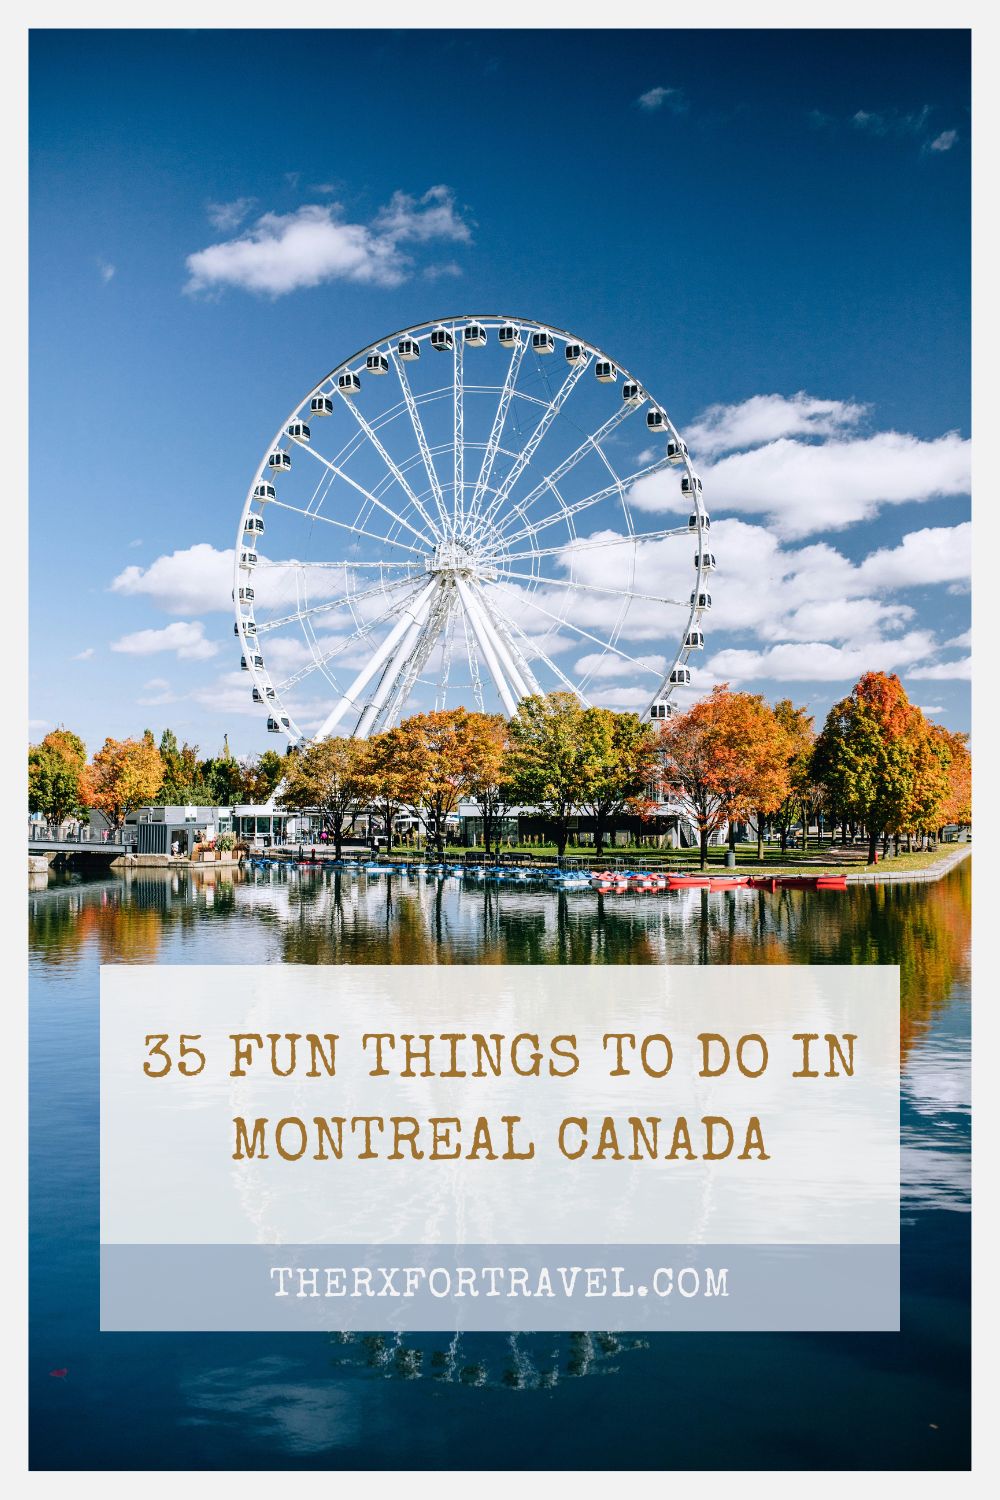 35 fun family things to do in montreal canada pinterest pin